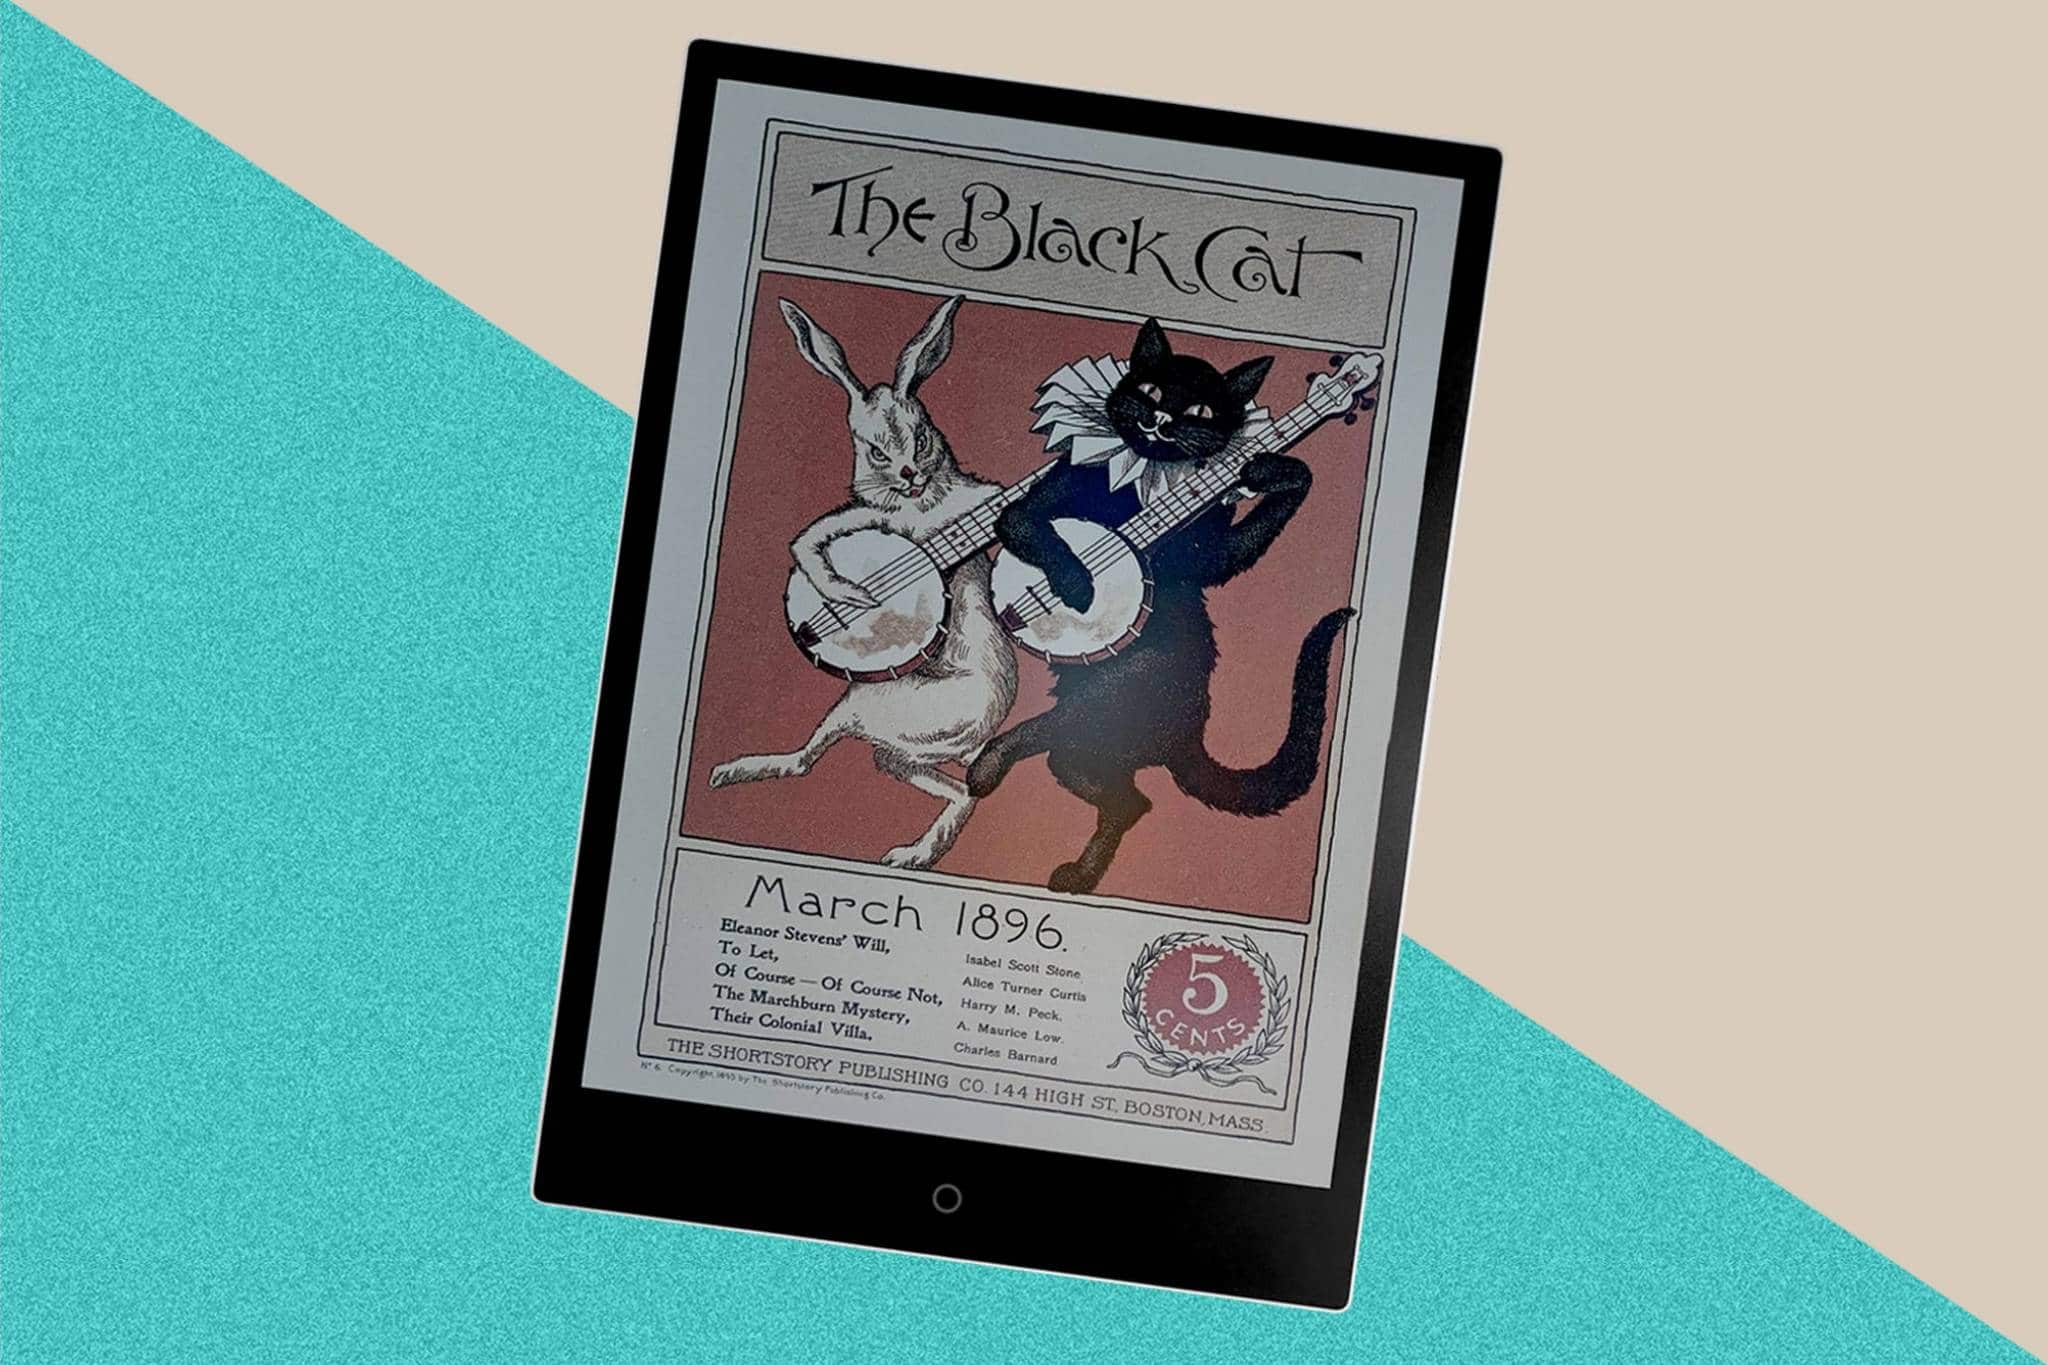 New E INK Carta 1250 will Supercharge Color e-Readers and e-notes